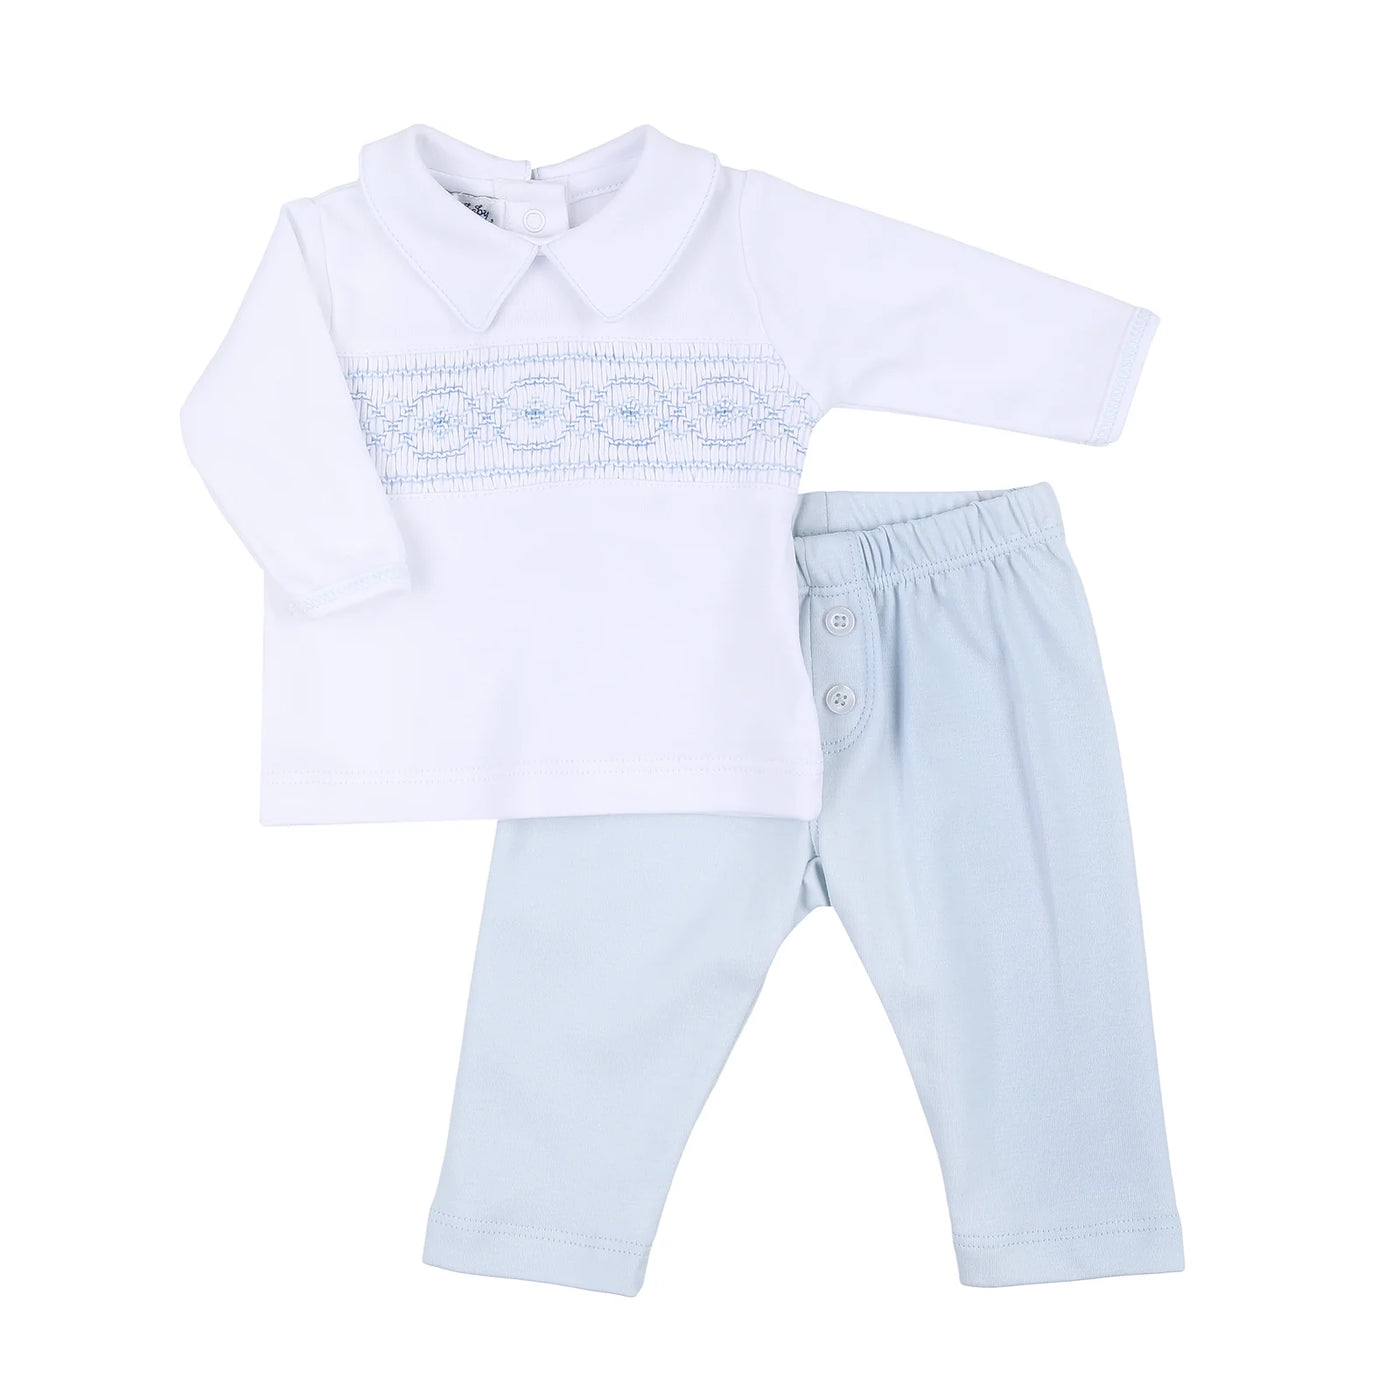 Abby and Alex Blue Smocked Collared Pant Set